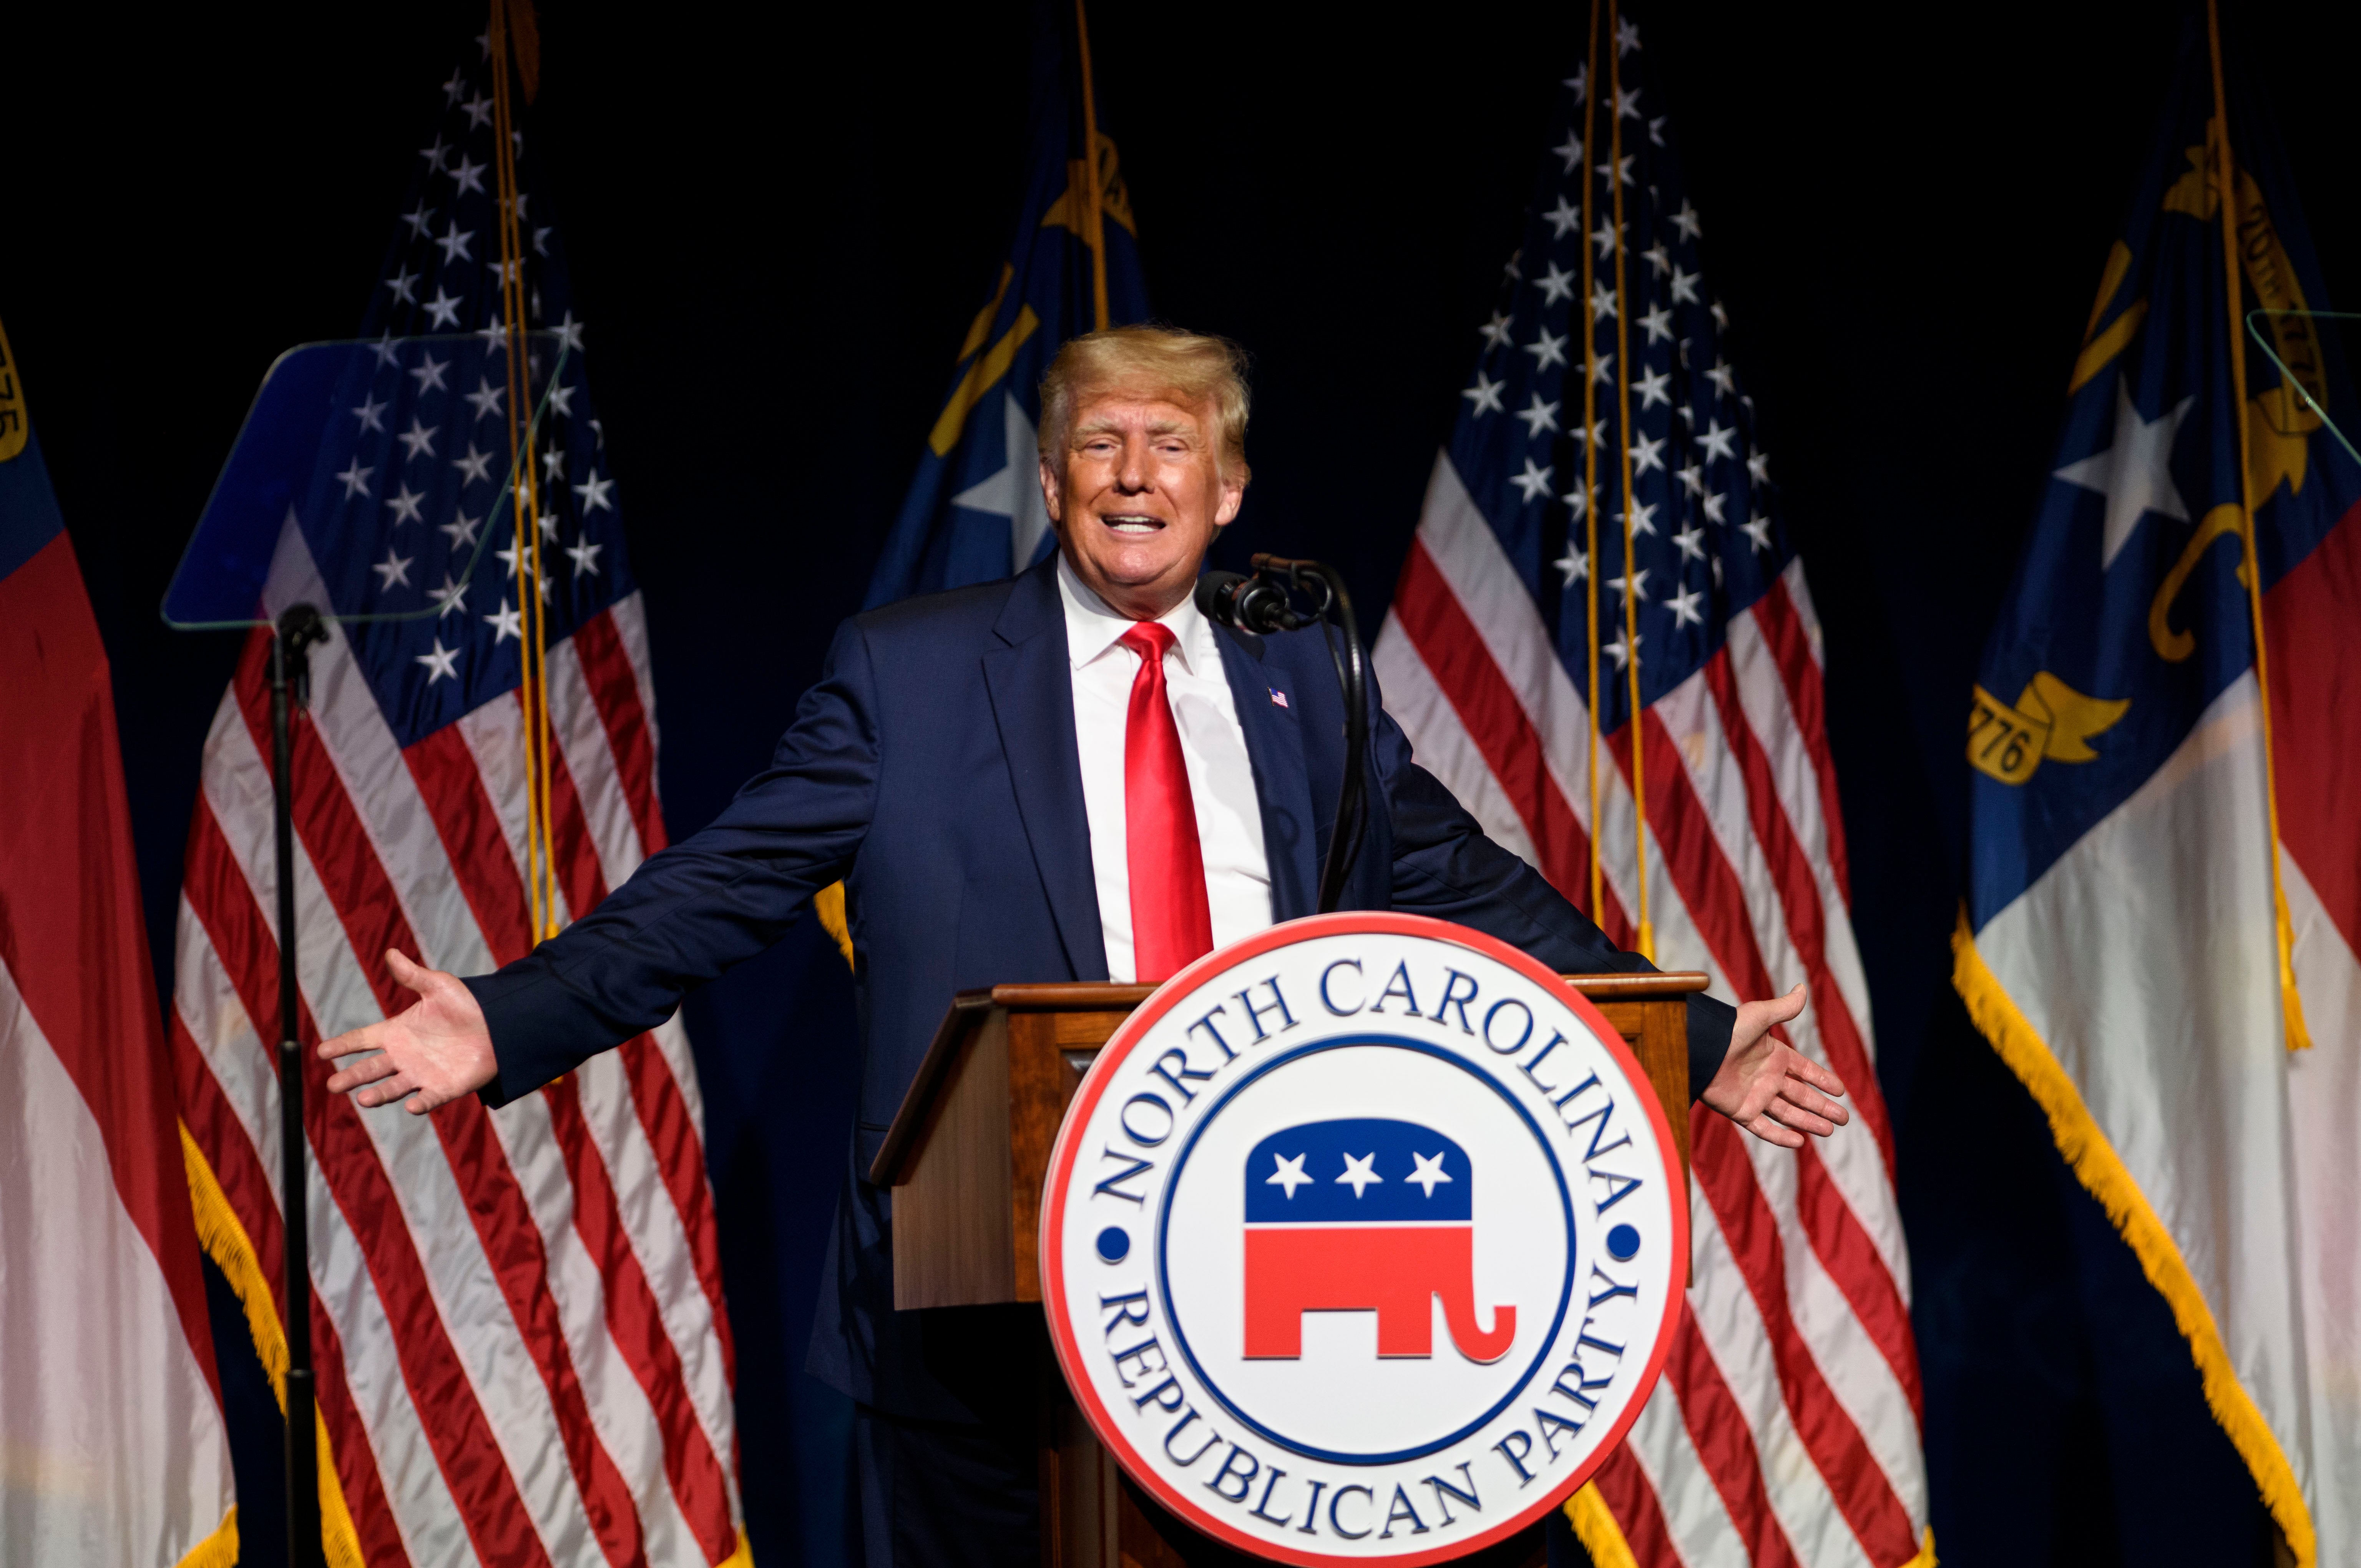 Former US President Donald Trump addresses the NCGOP state convention on 5 June, 2021 in Greenville, North Carolina. Mr Trump could end up getting legal defense from President Joe Biden’s Justice Department.